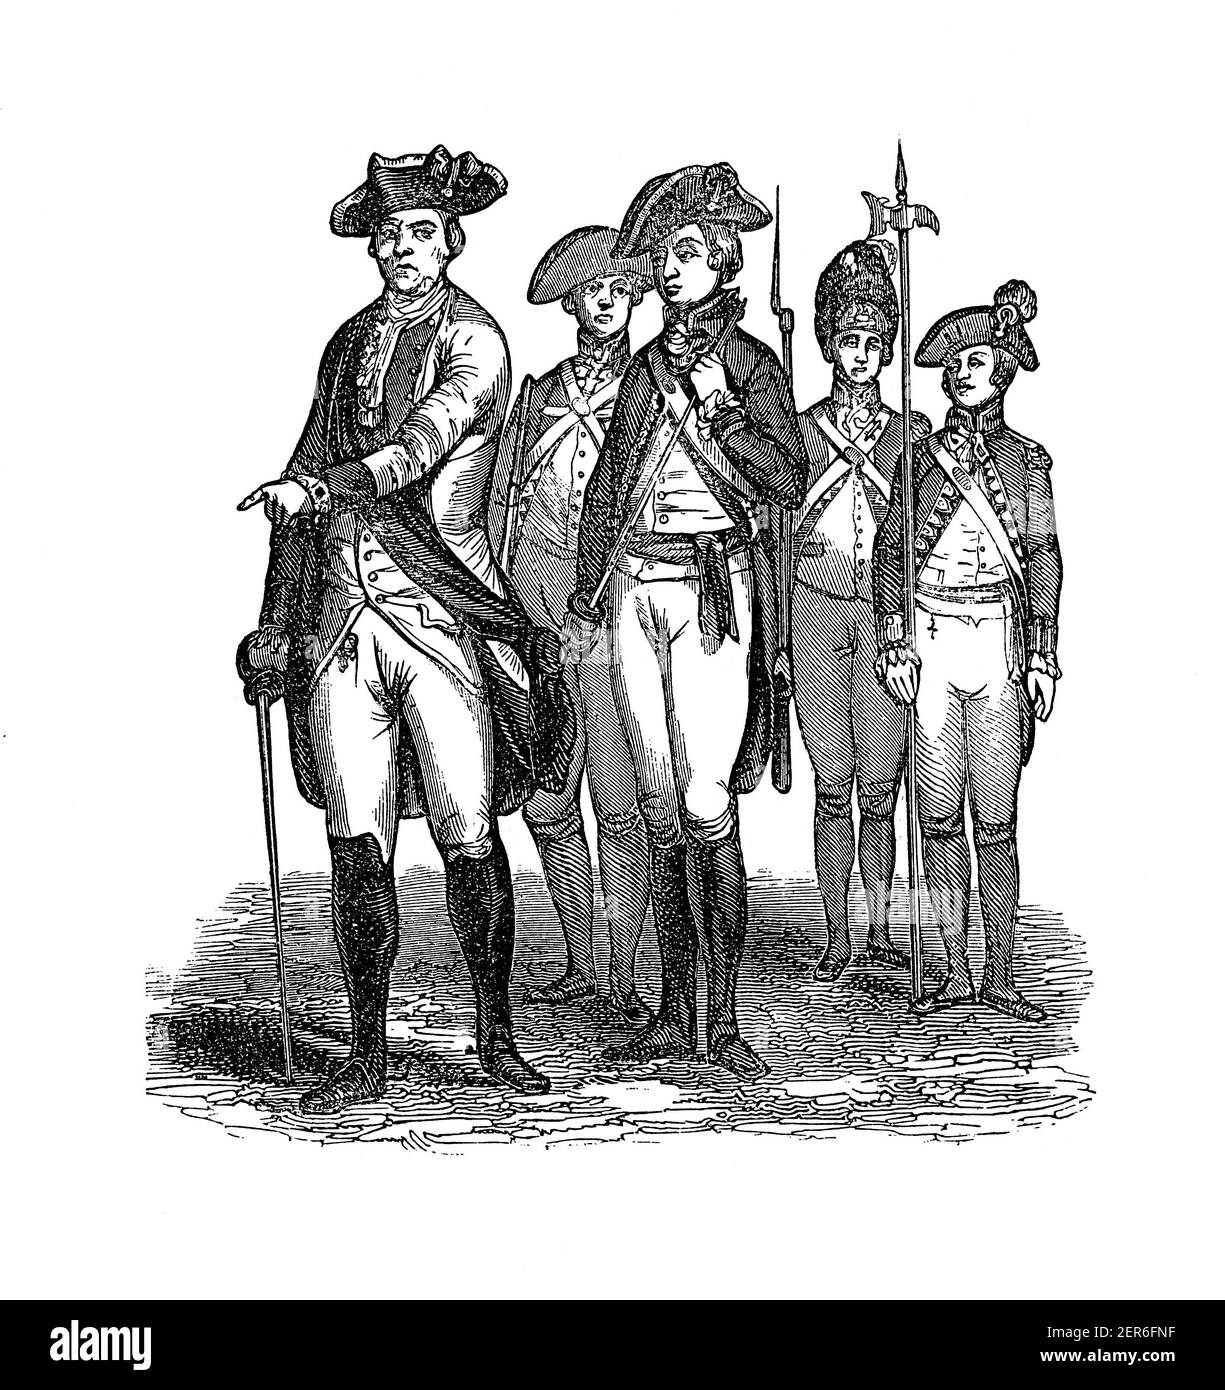 Antique engraving of British infantrymen in 1775. Illustration published in The Pictorial Life of General Washington by J. Frost, LL.D. (Charles J. Gi Stock Photo